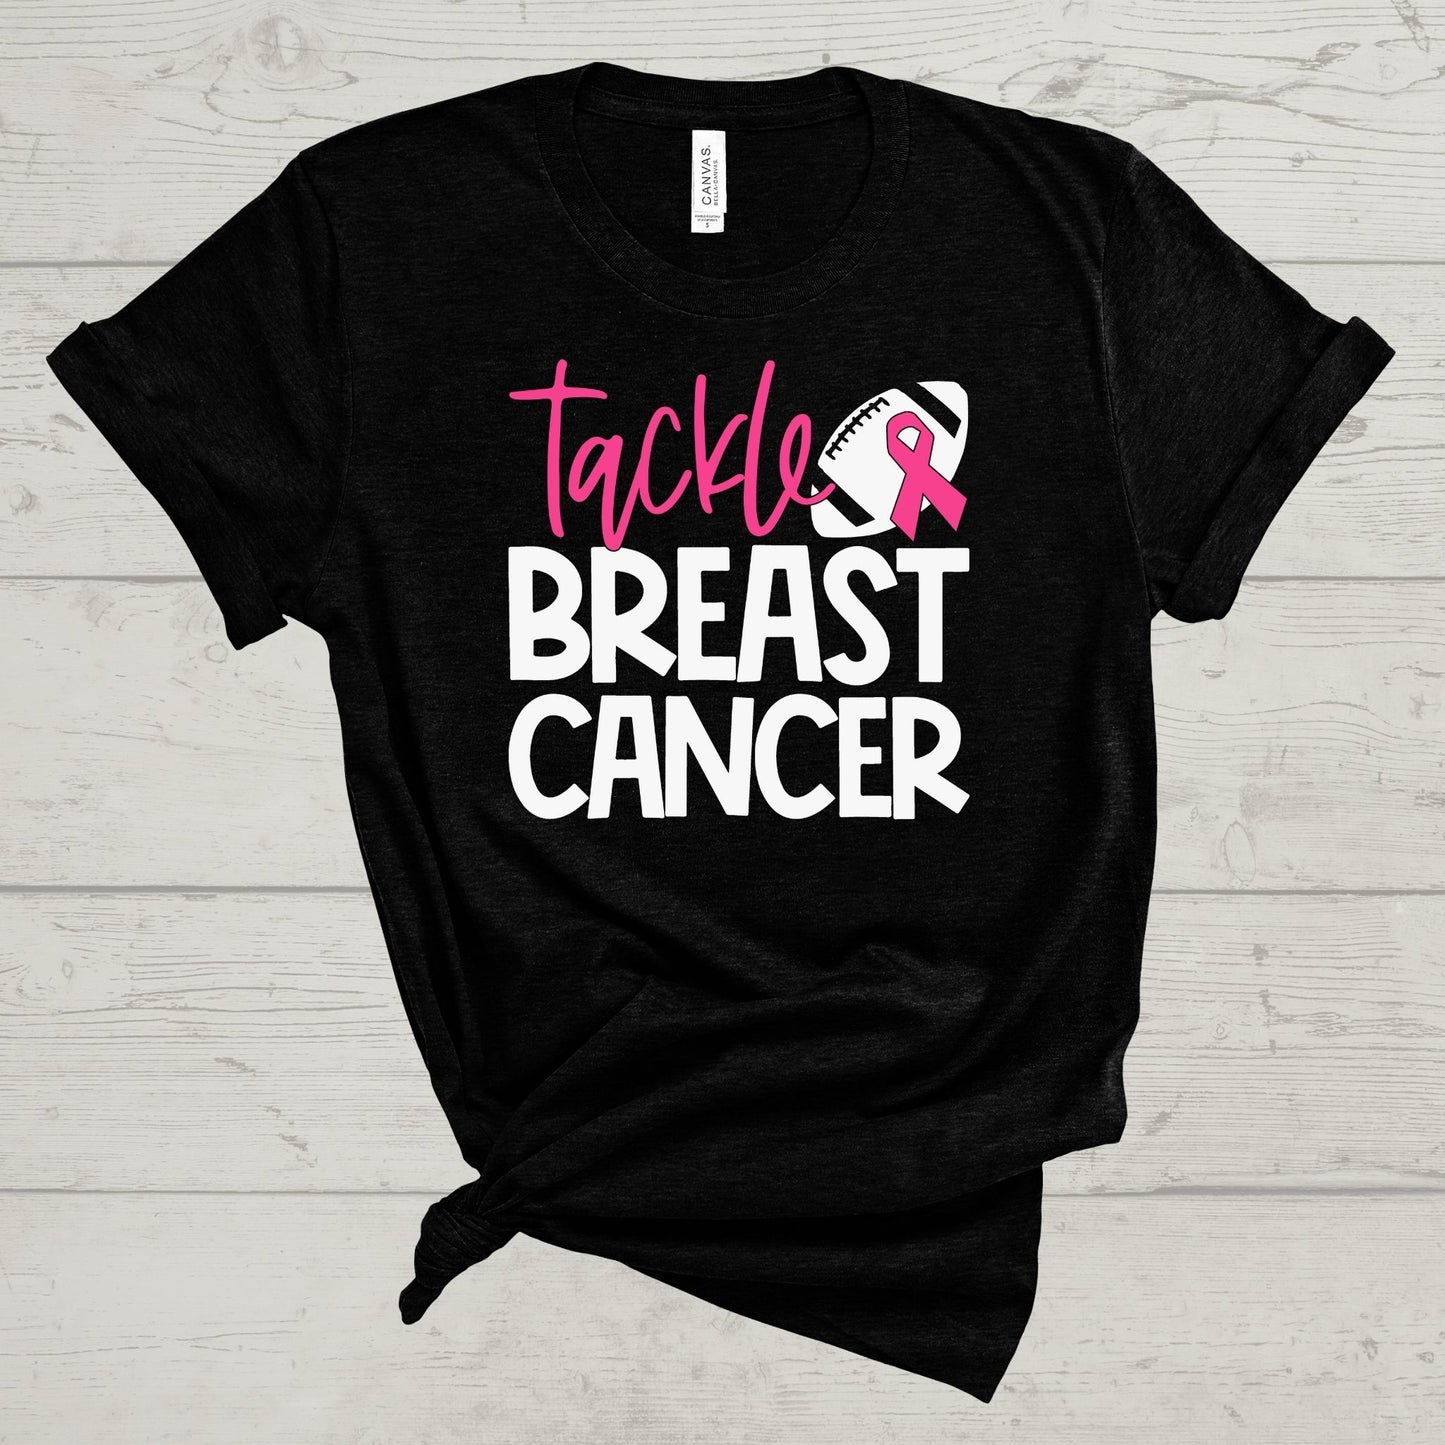 TACKLE BREAST CANCER TEE-BREAST CANCER AWARENESS